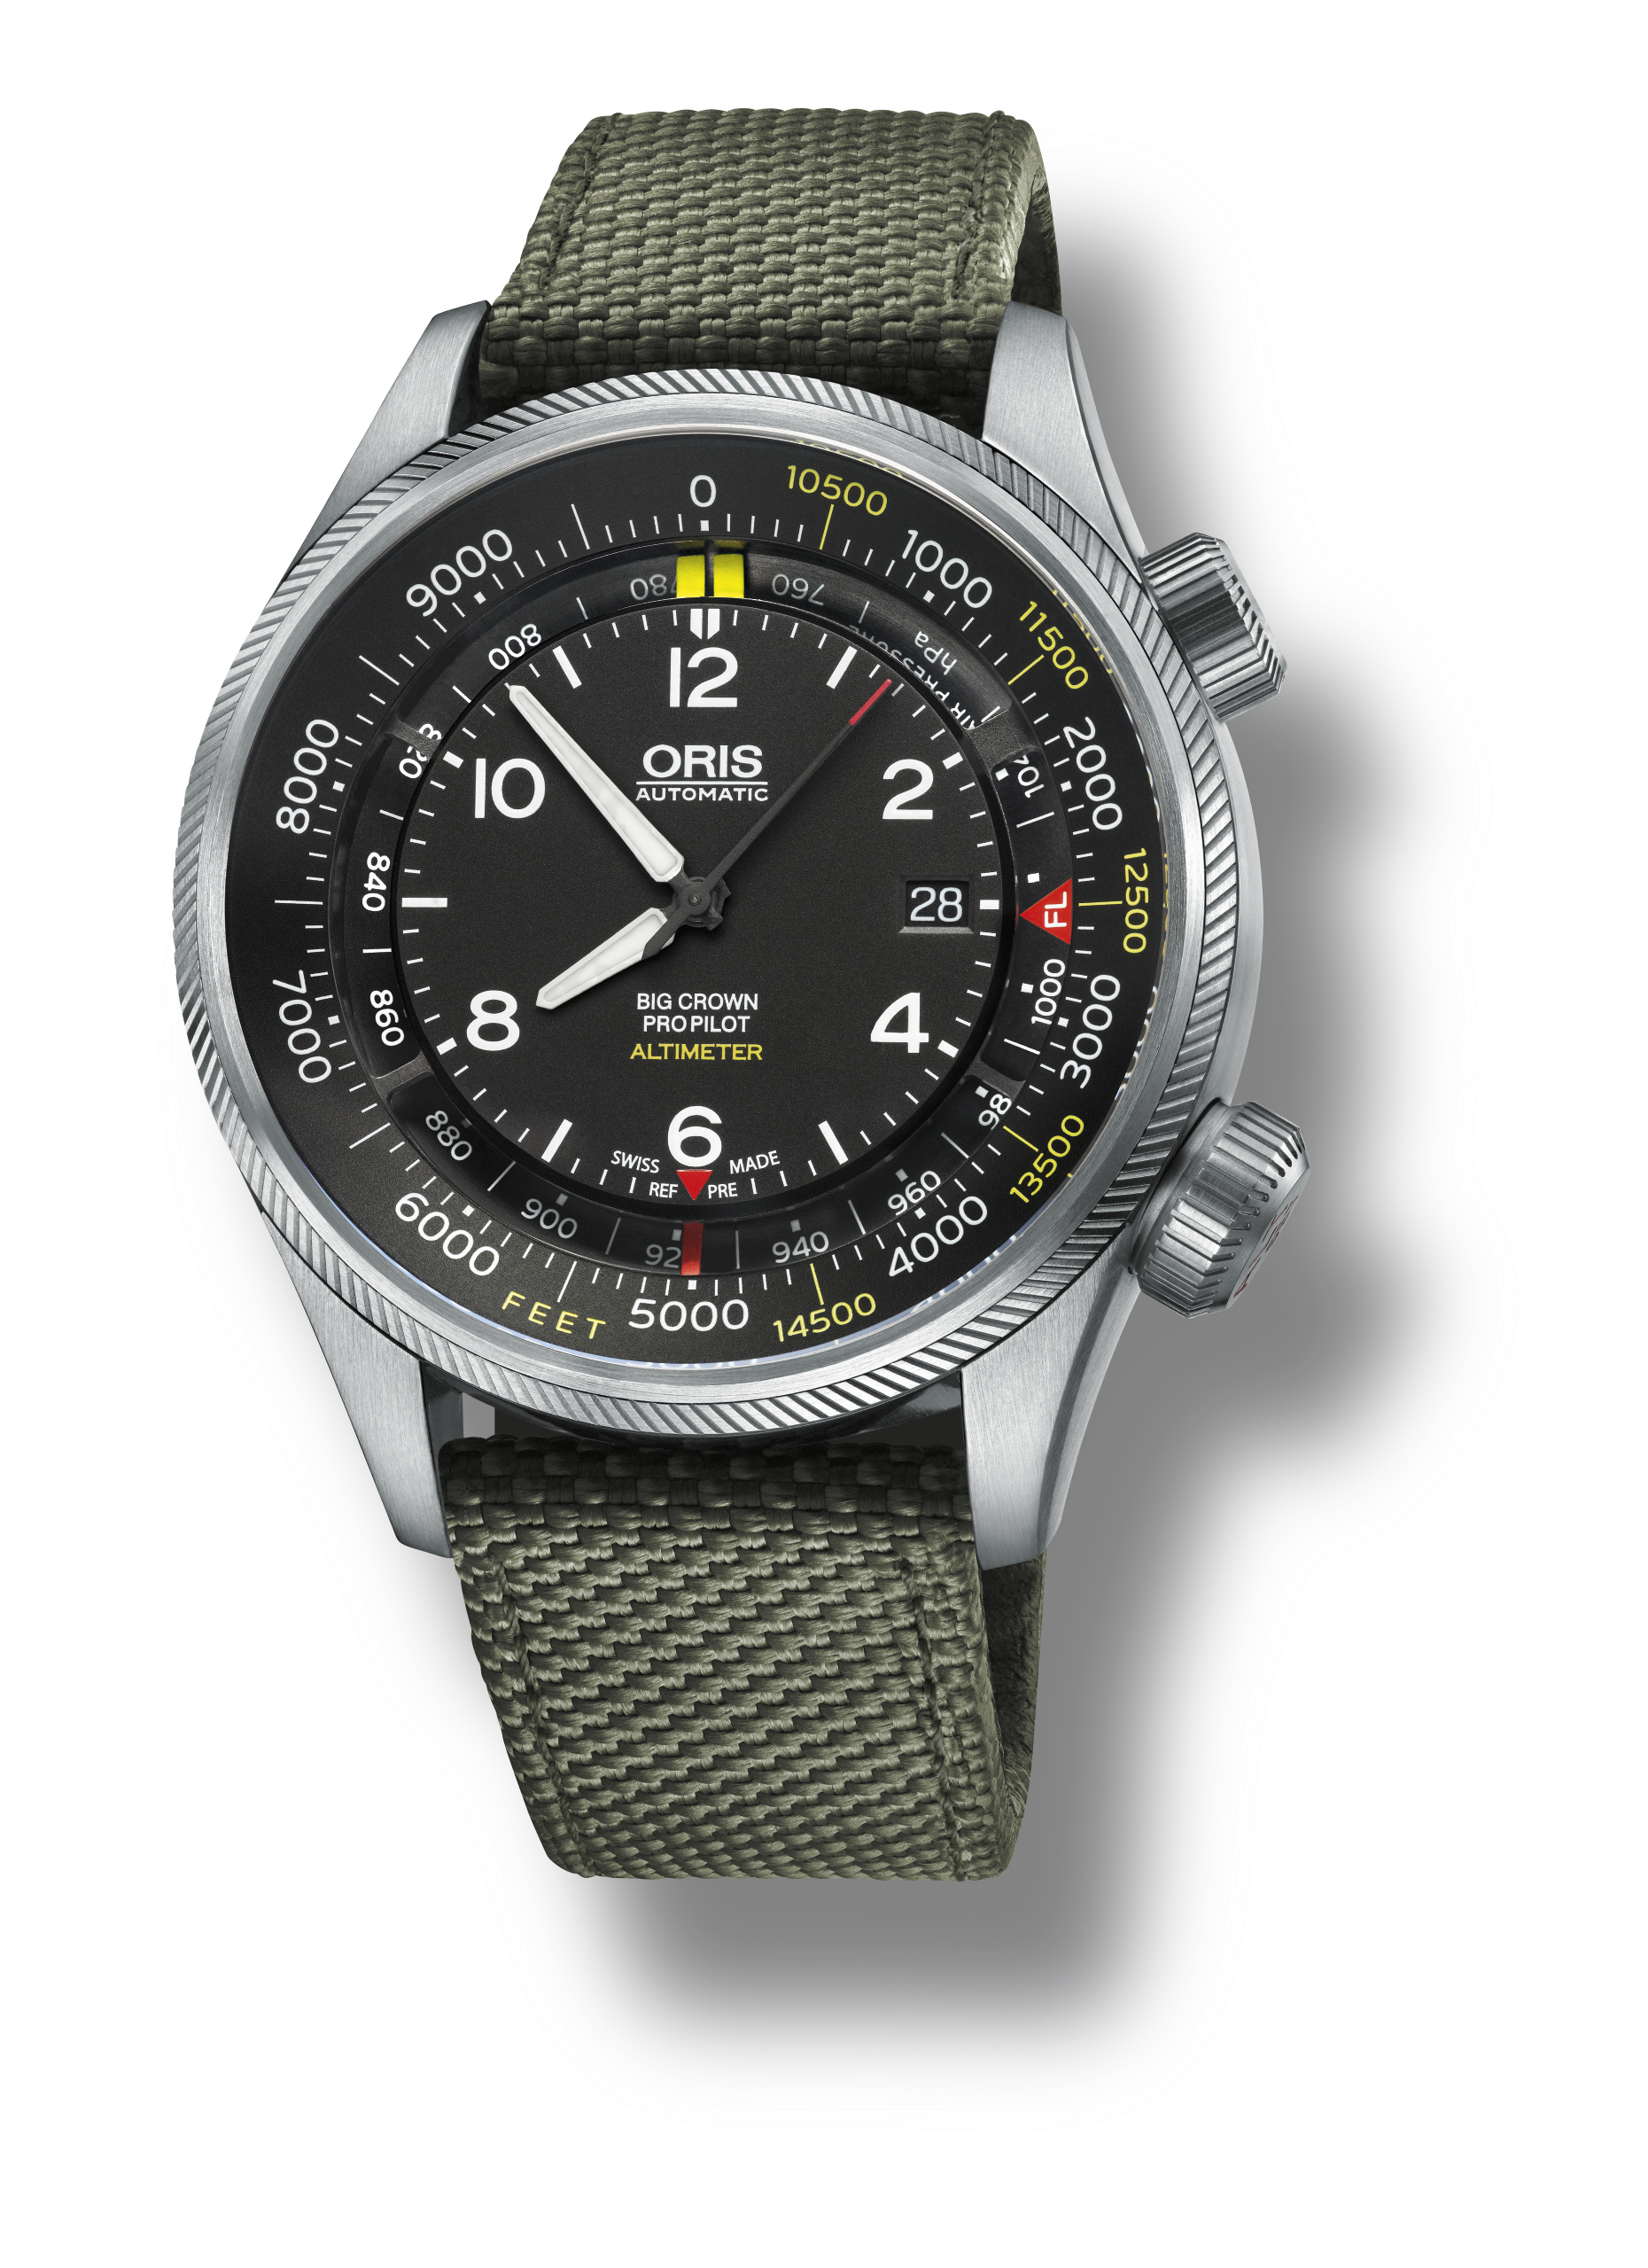 Flying High: Five Watches with Altimeters | WatchTime - USA's No.1 Watch  Magazine